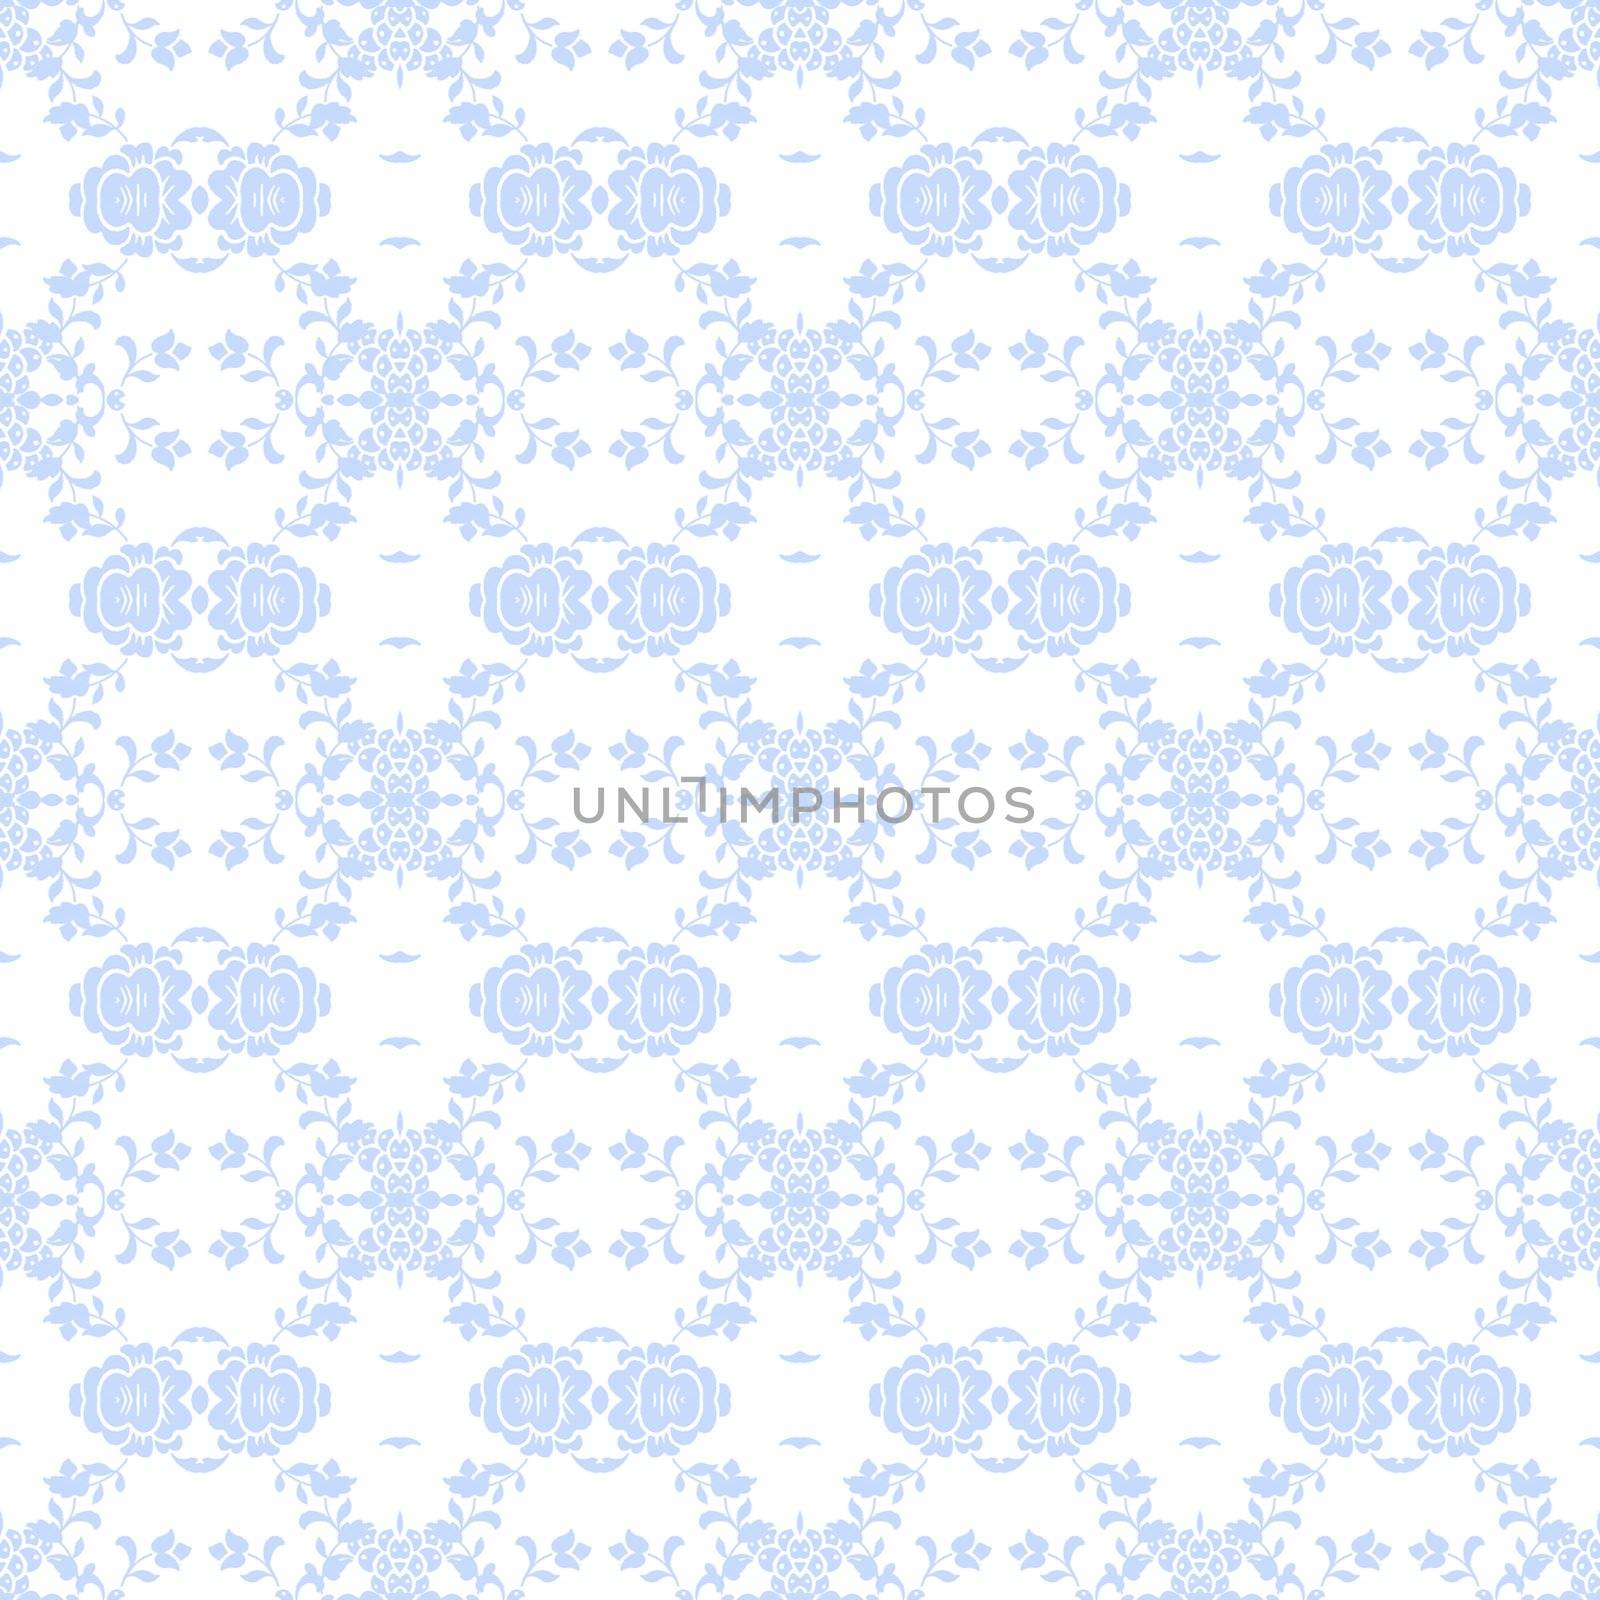 Baby blue vine and cluster elements in a damask style pattern